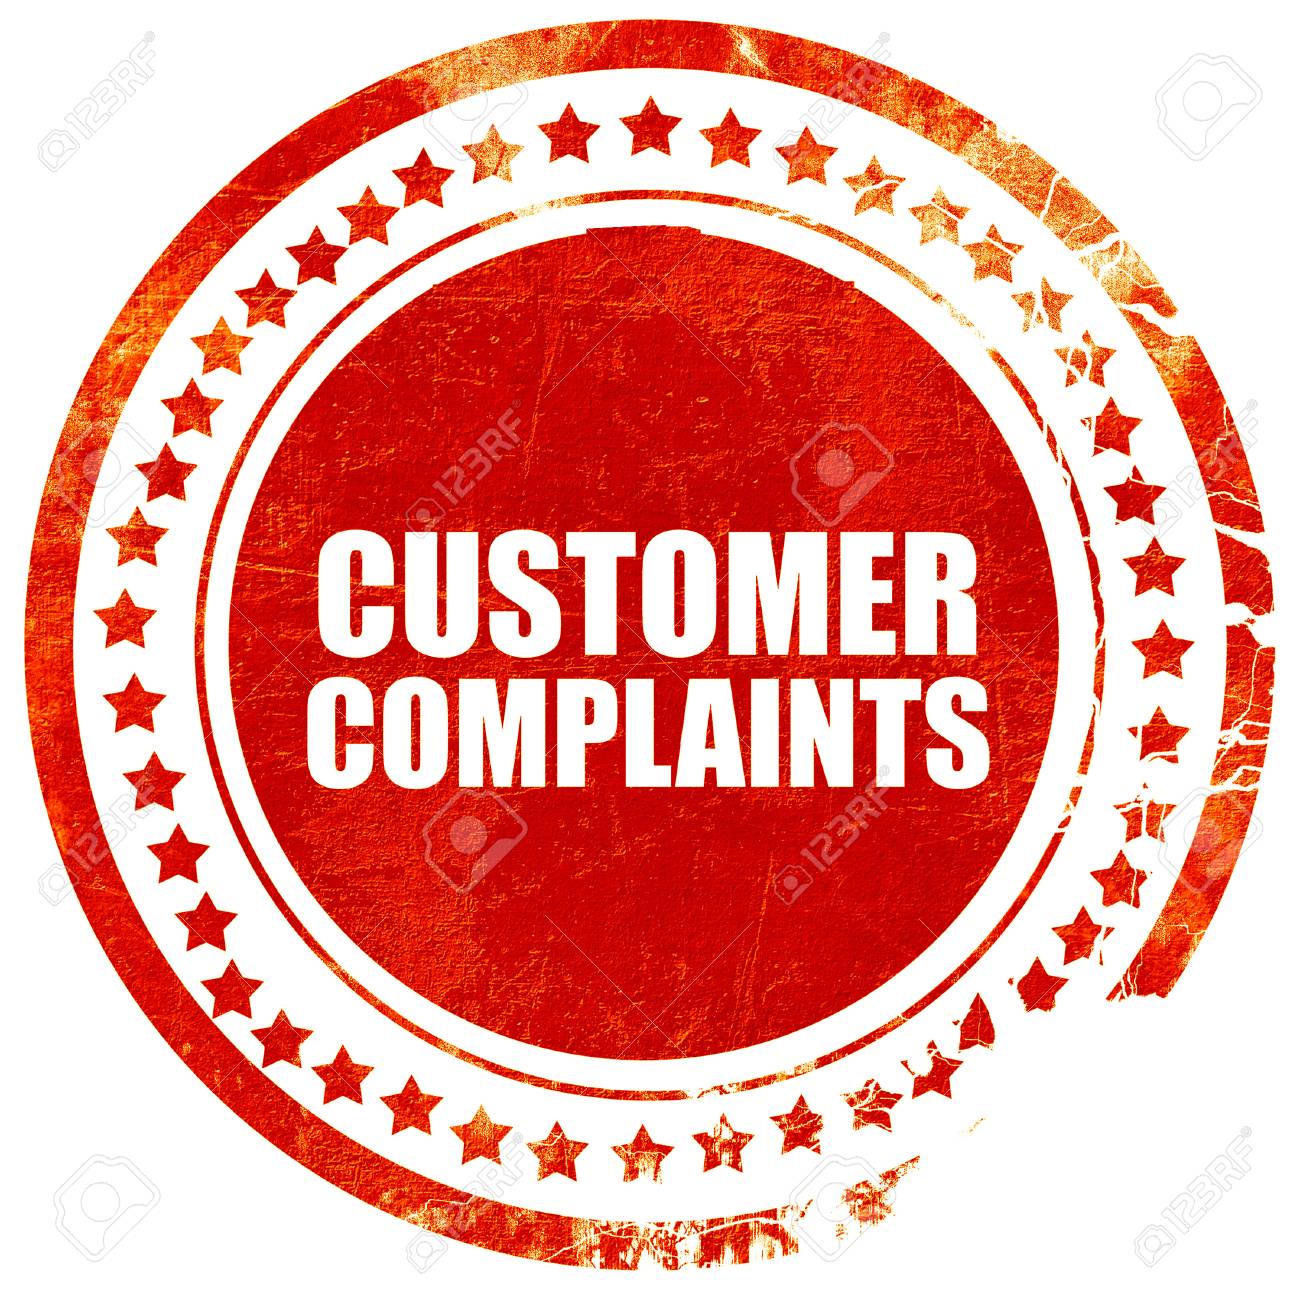 Implementing & Managing a Customer Complaints System